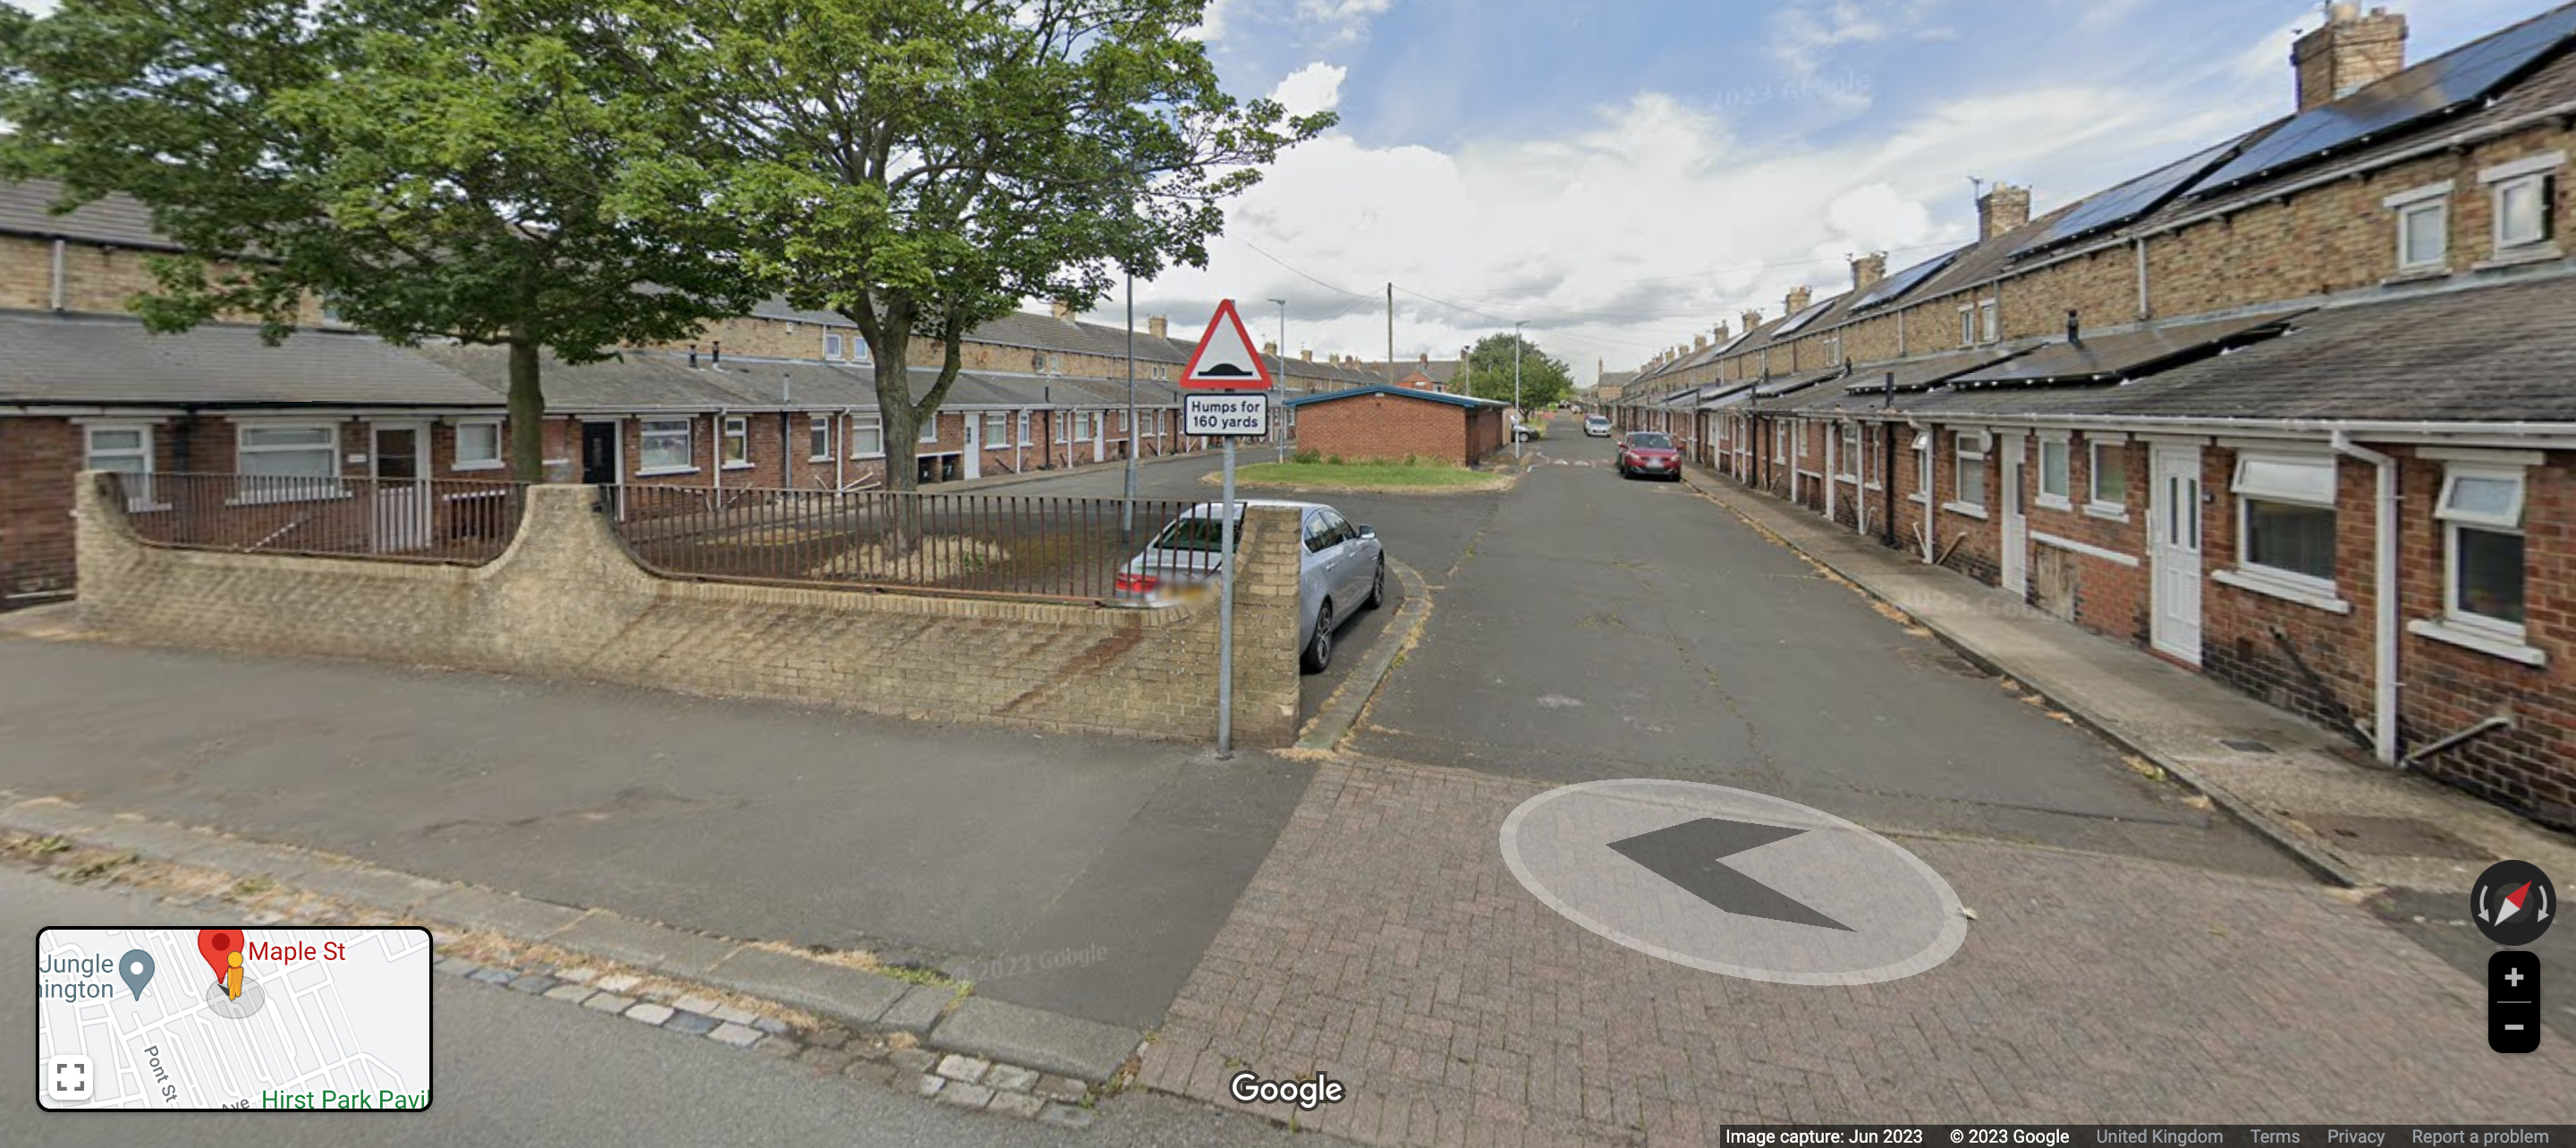 Police were called to the Maple Street in Ashington after reports that a dog had injured a child